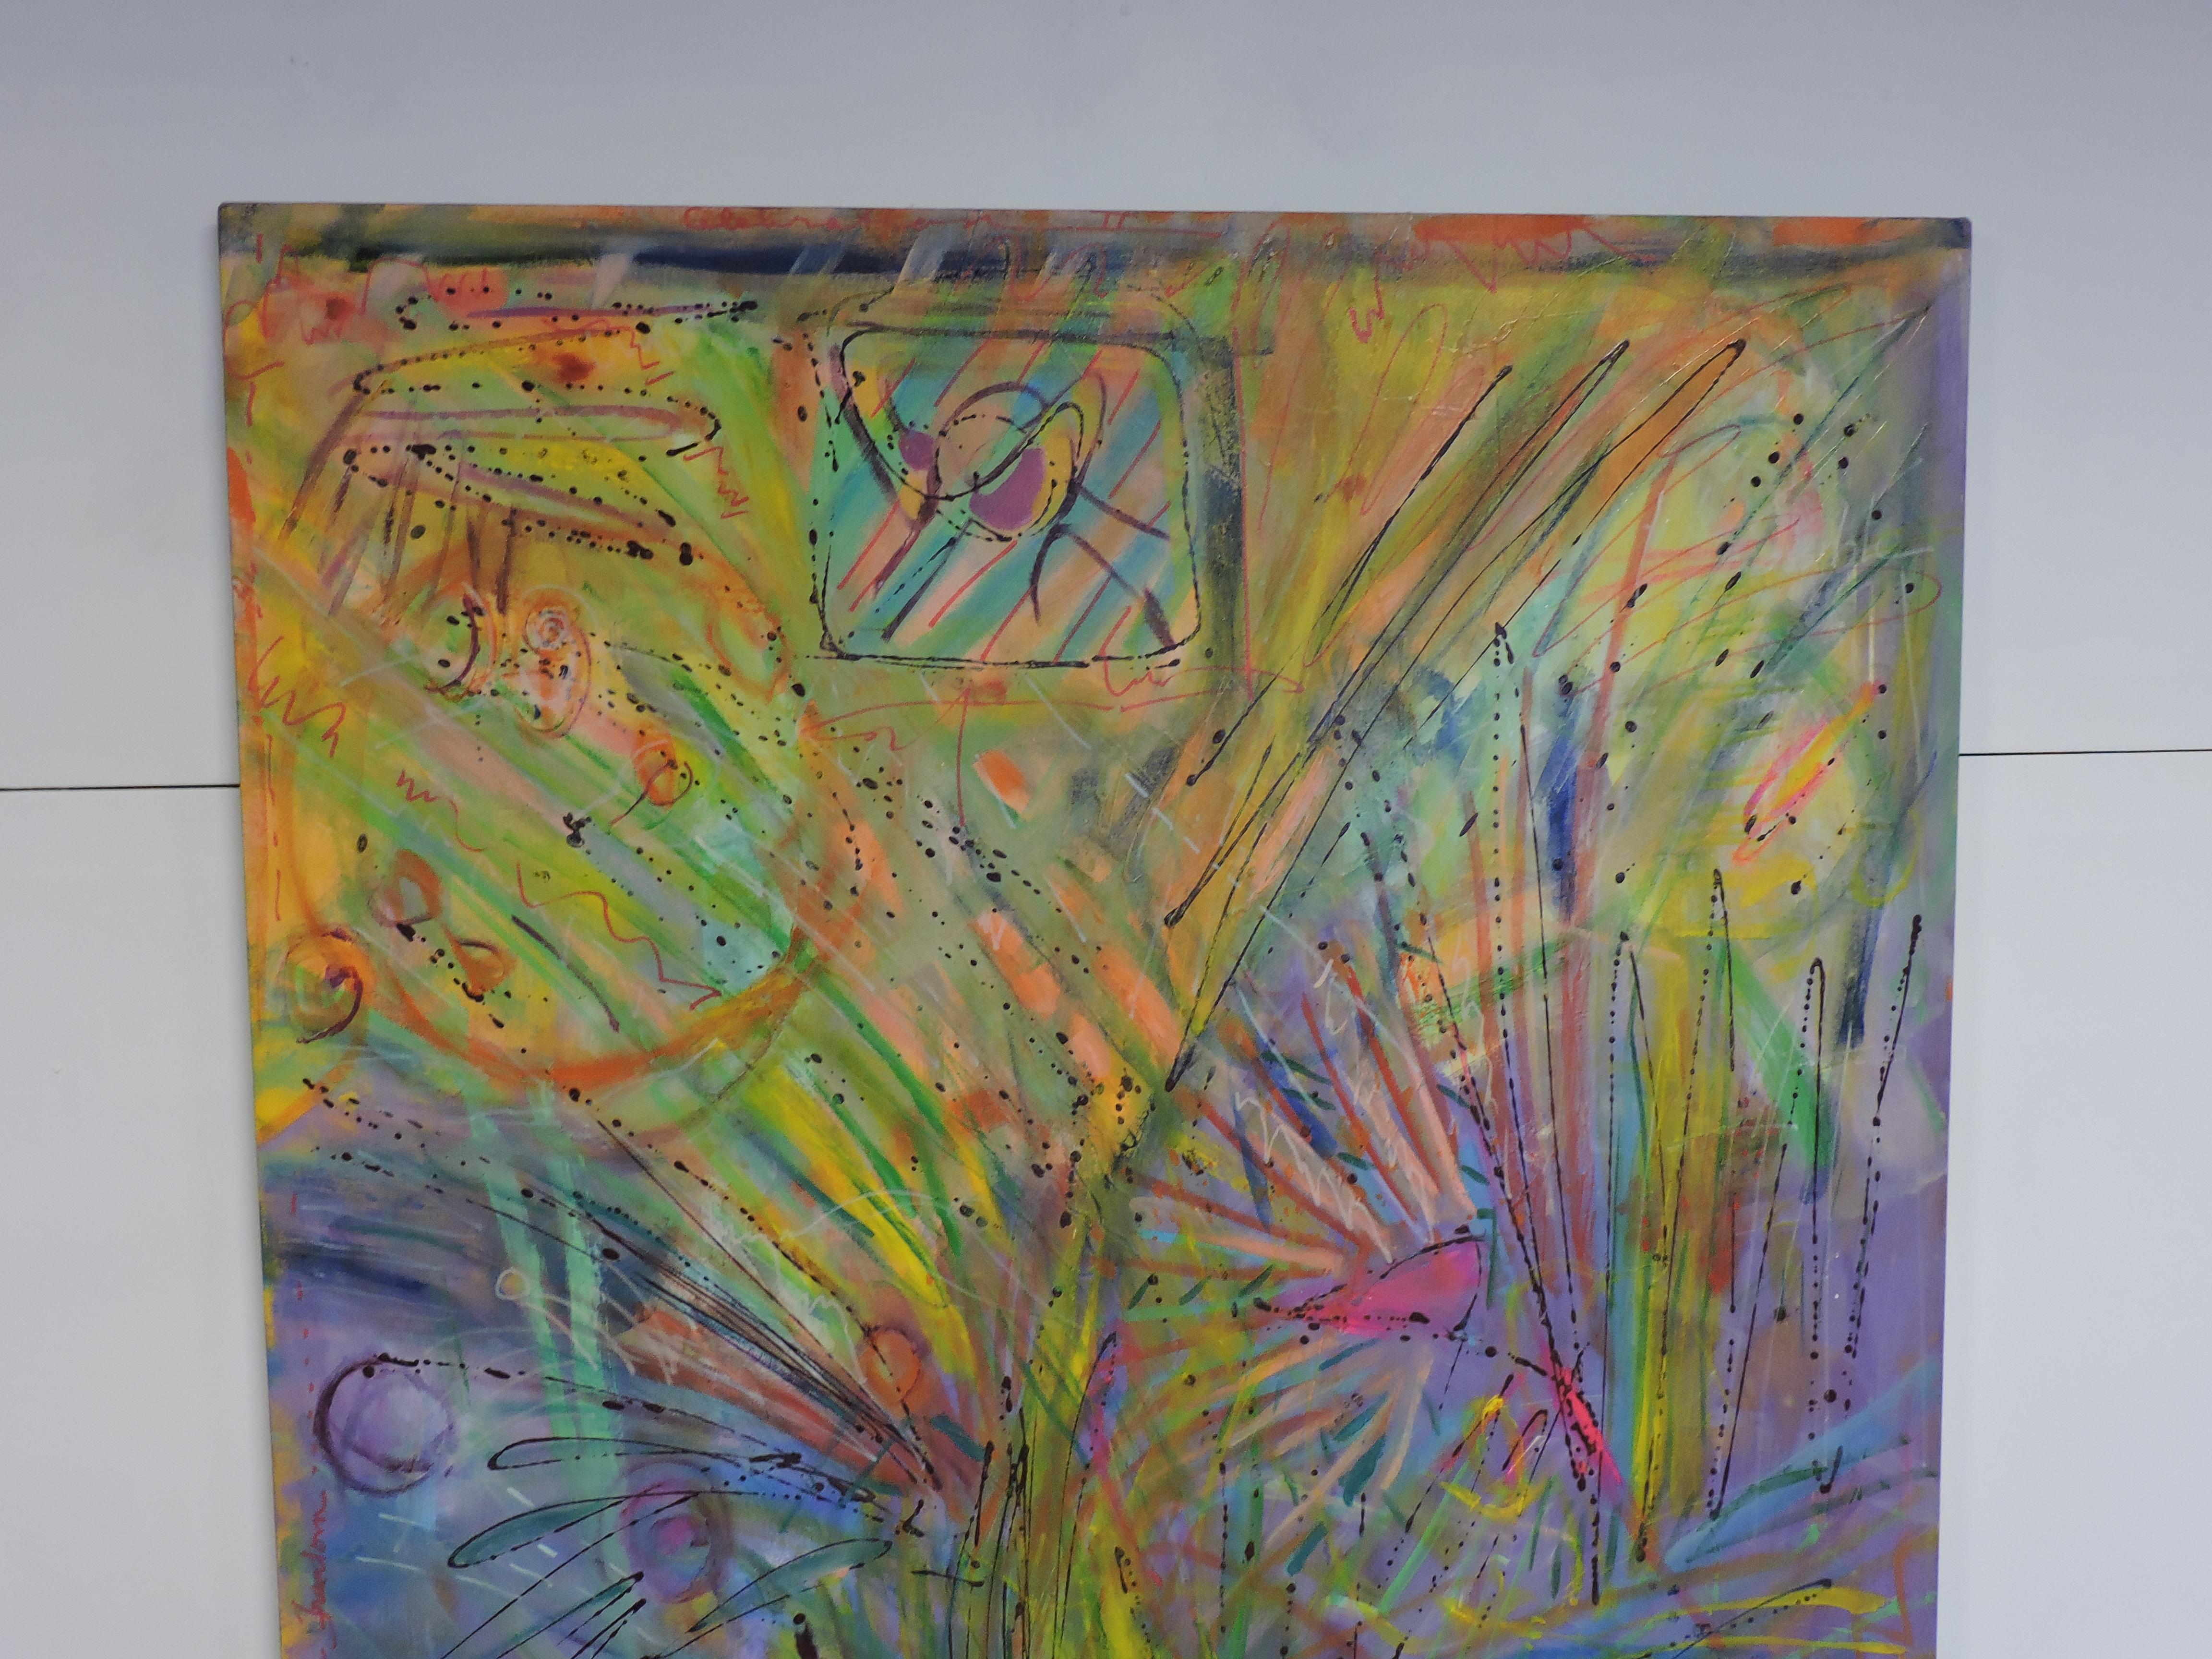 Beautiful large-scale abstract painting on canvas by noted Philadelphia artist, Anne Boysen (1939-2011). This art work, titled Celebration II, is an explosion of joyous color. Unframed, but with a painted edge. Signed on verso.

Ms. Boysen's work is